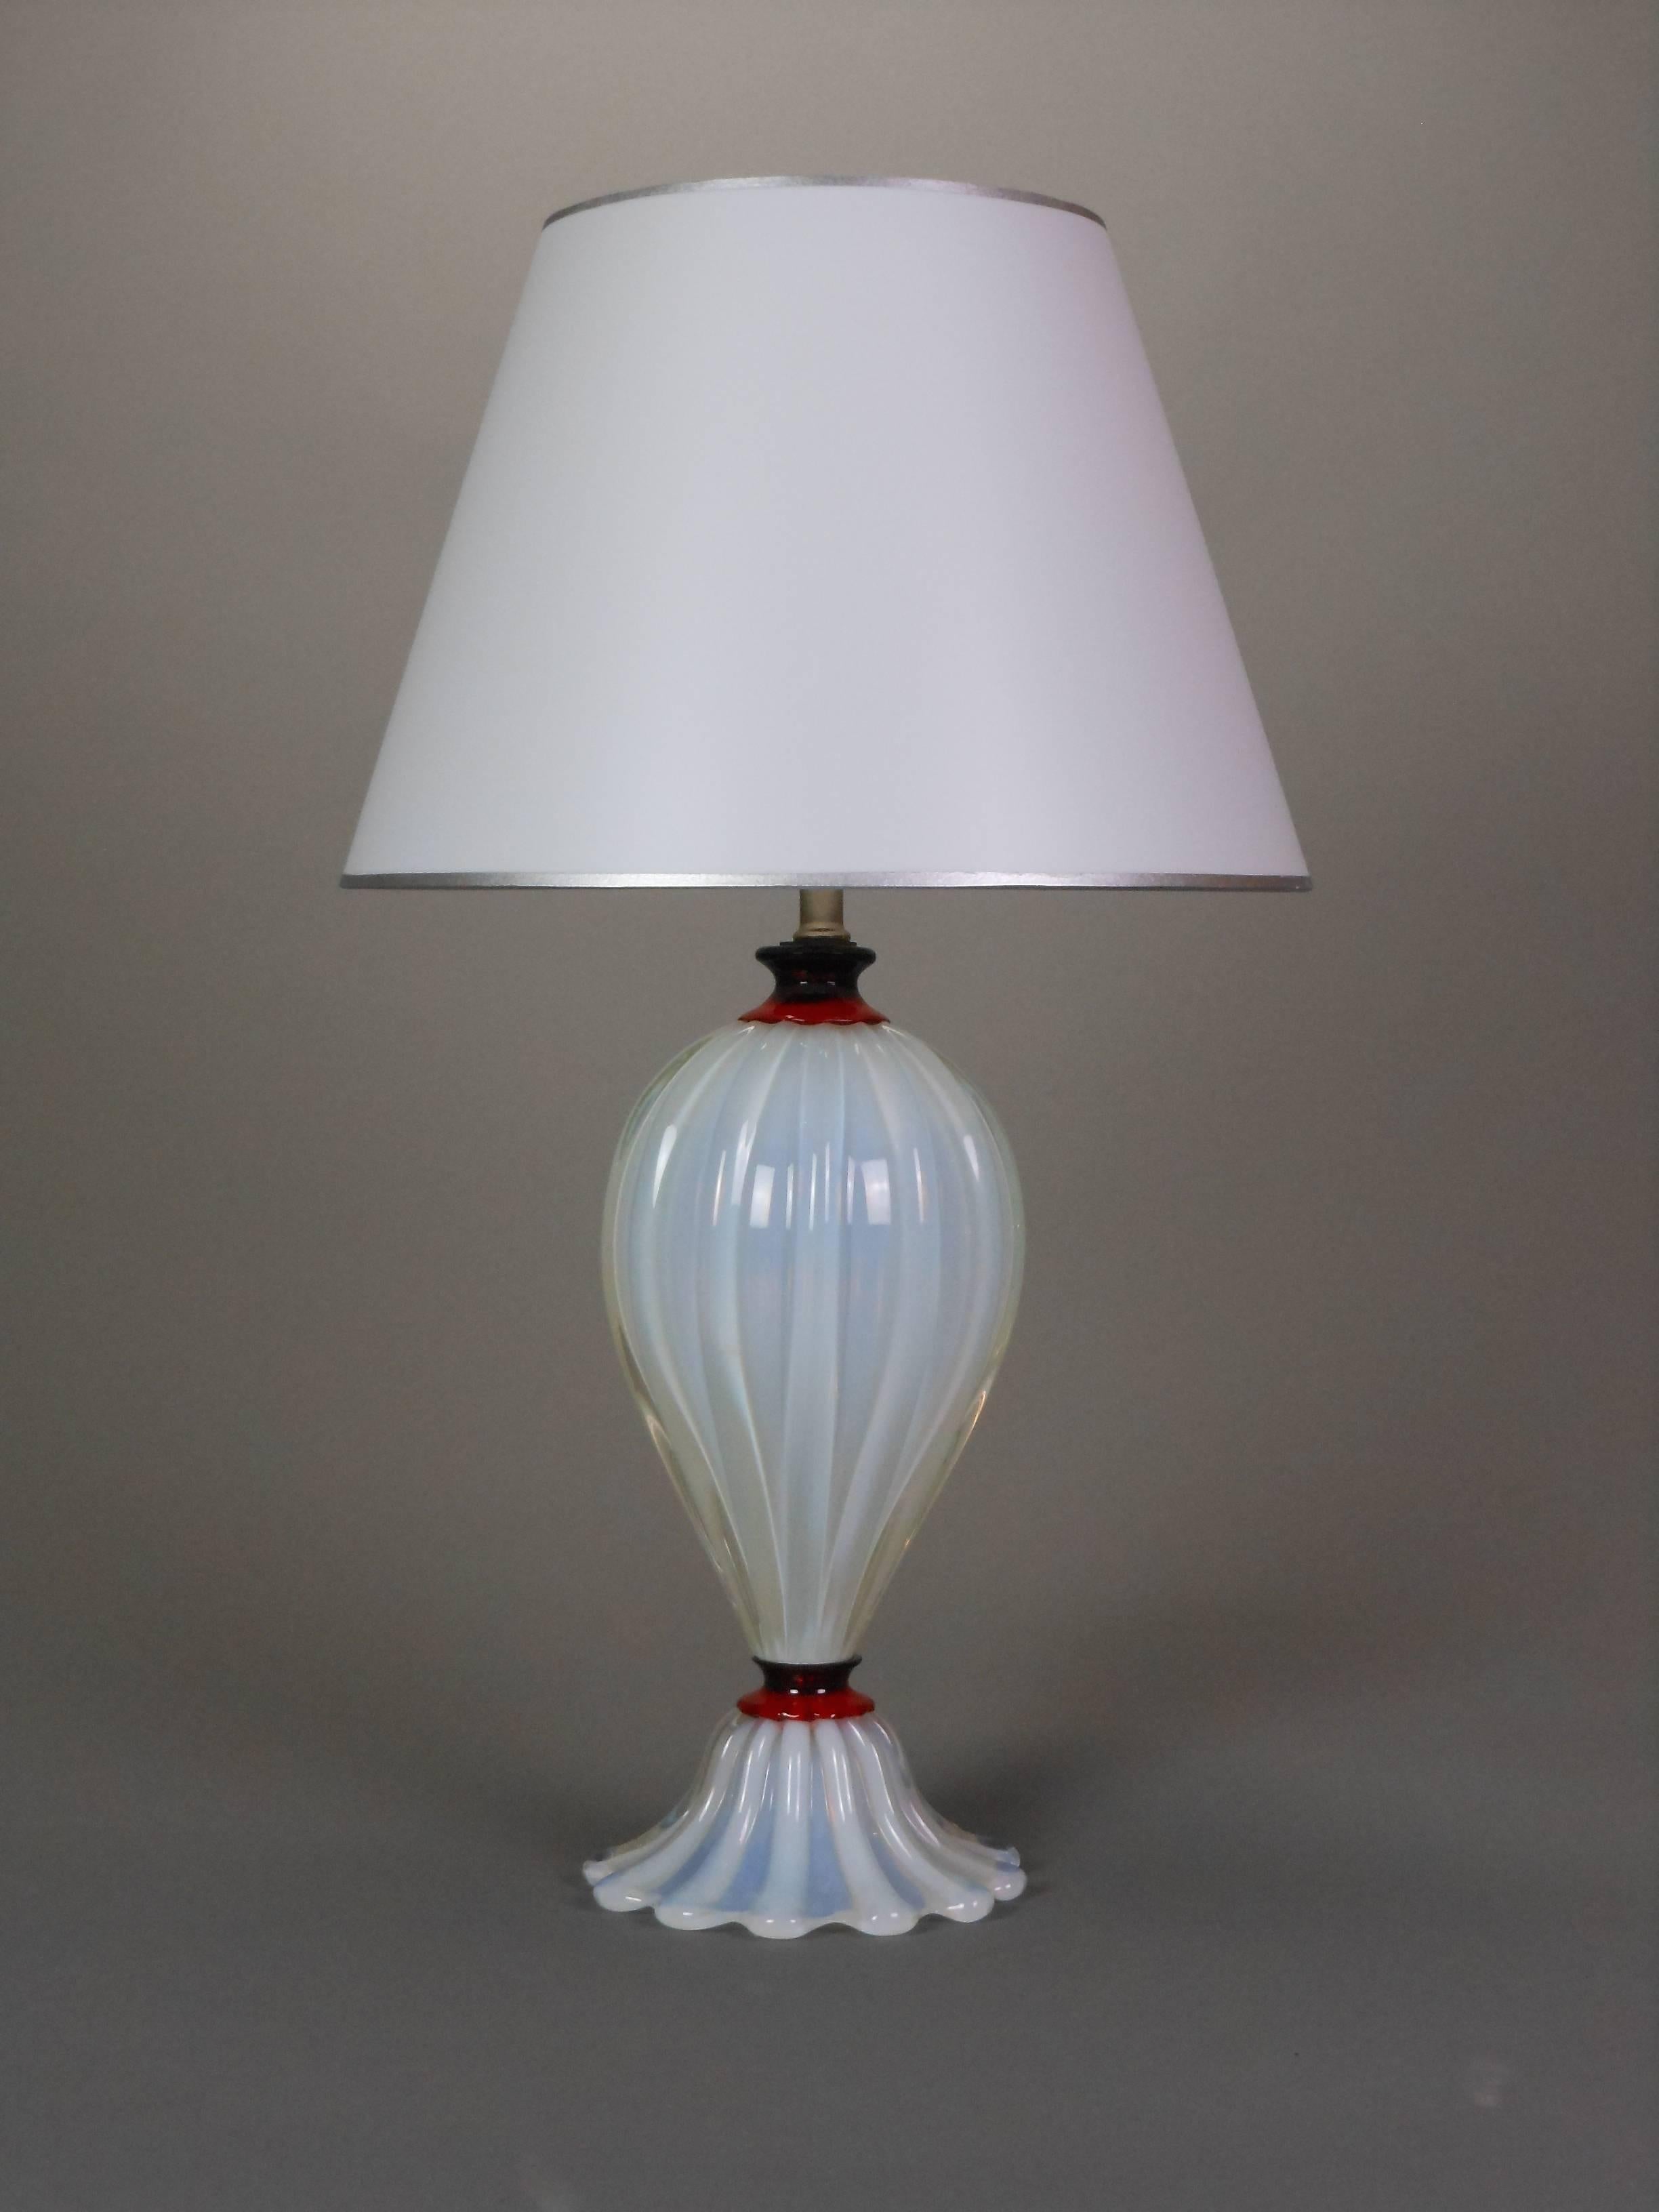 Each of fluted baluster form on domed scalloped edge bases.

Height to base of light socket: 14